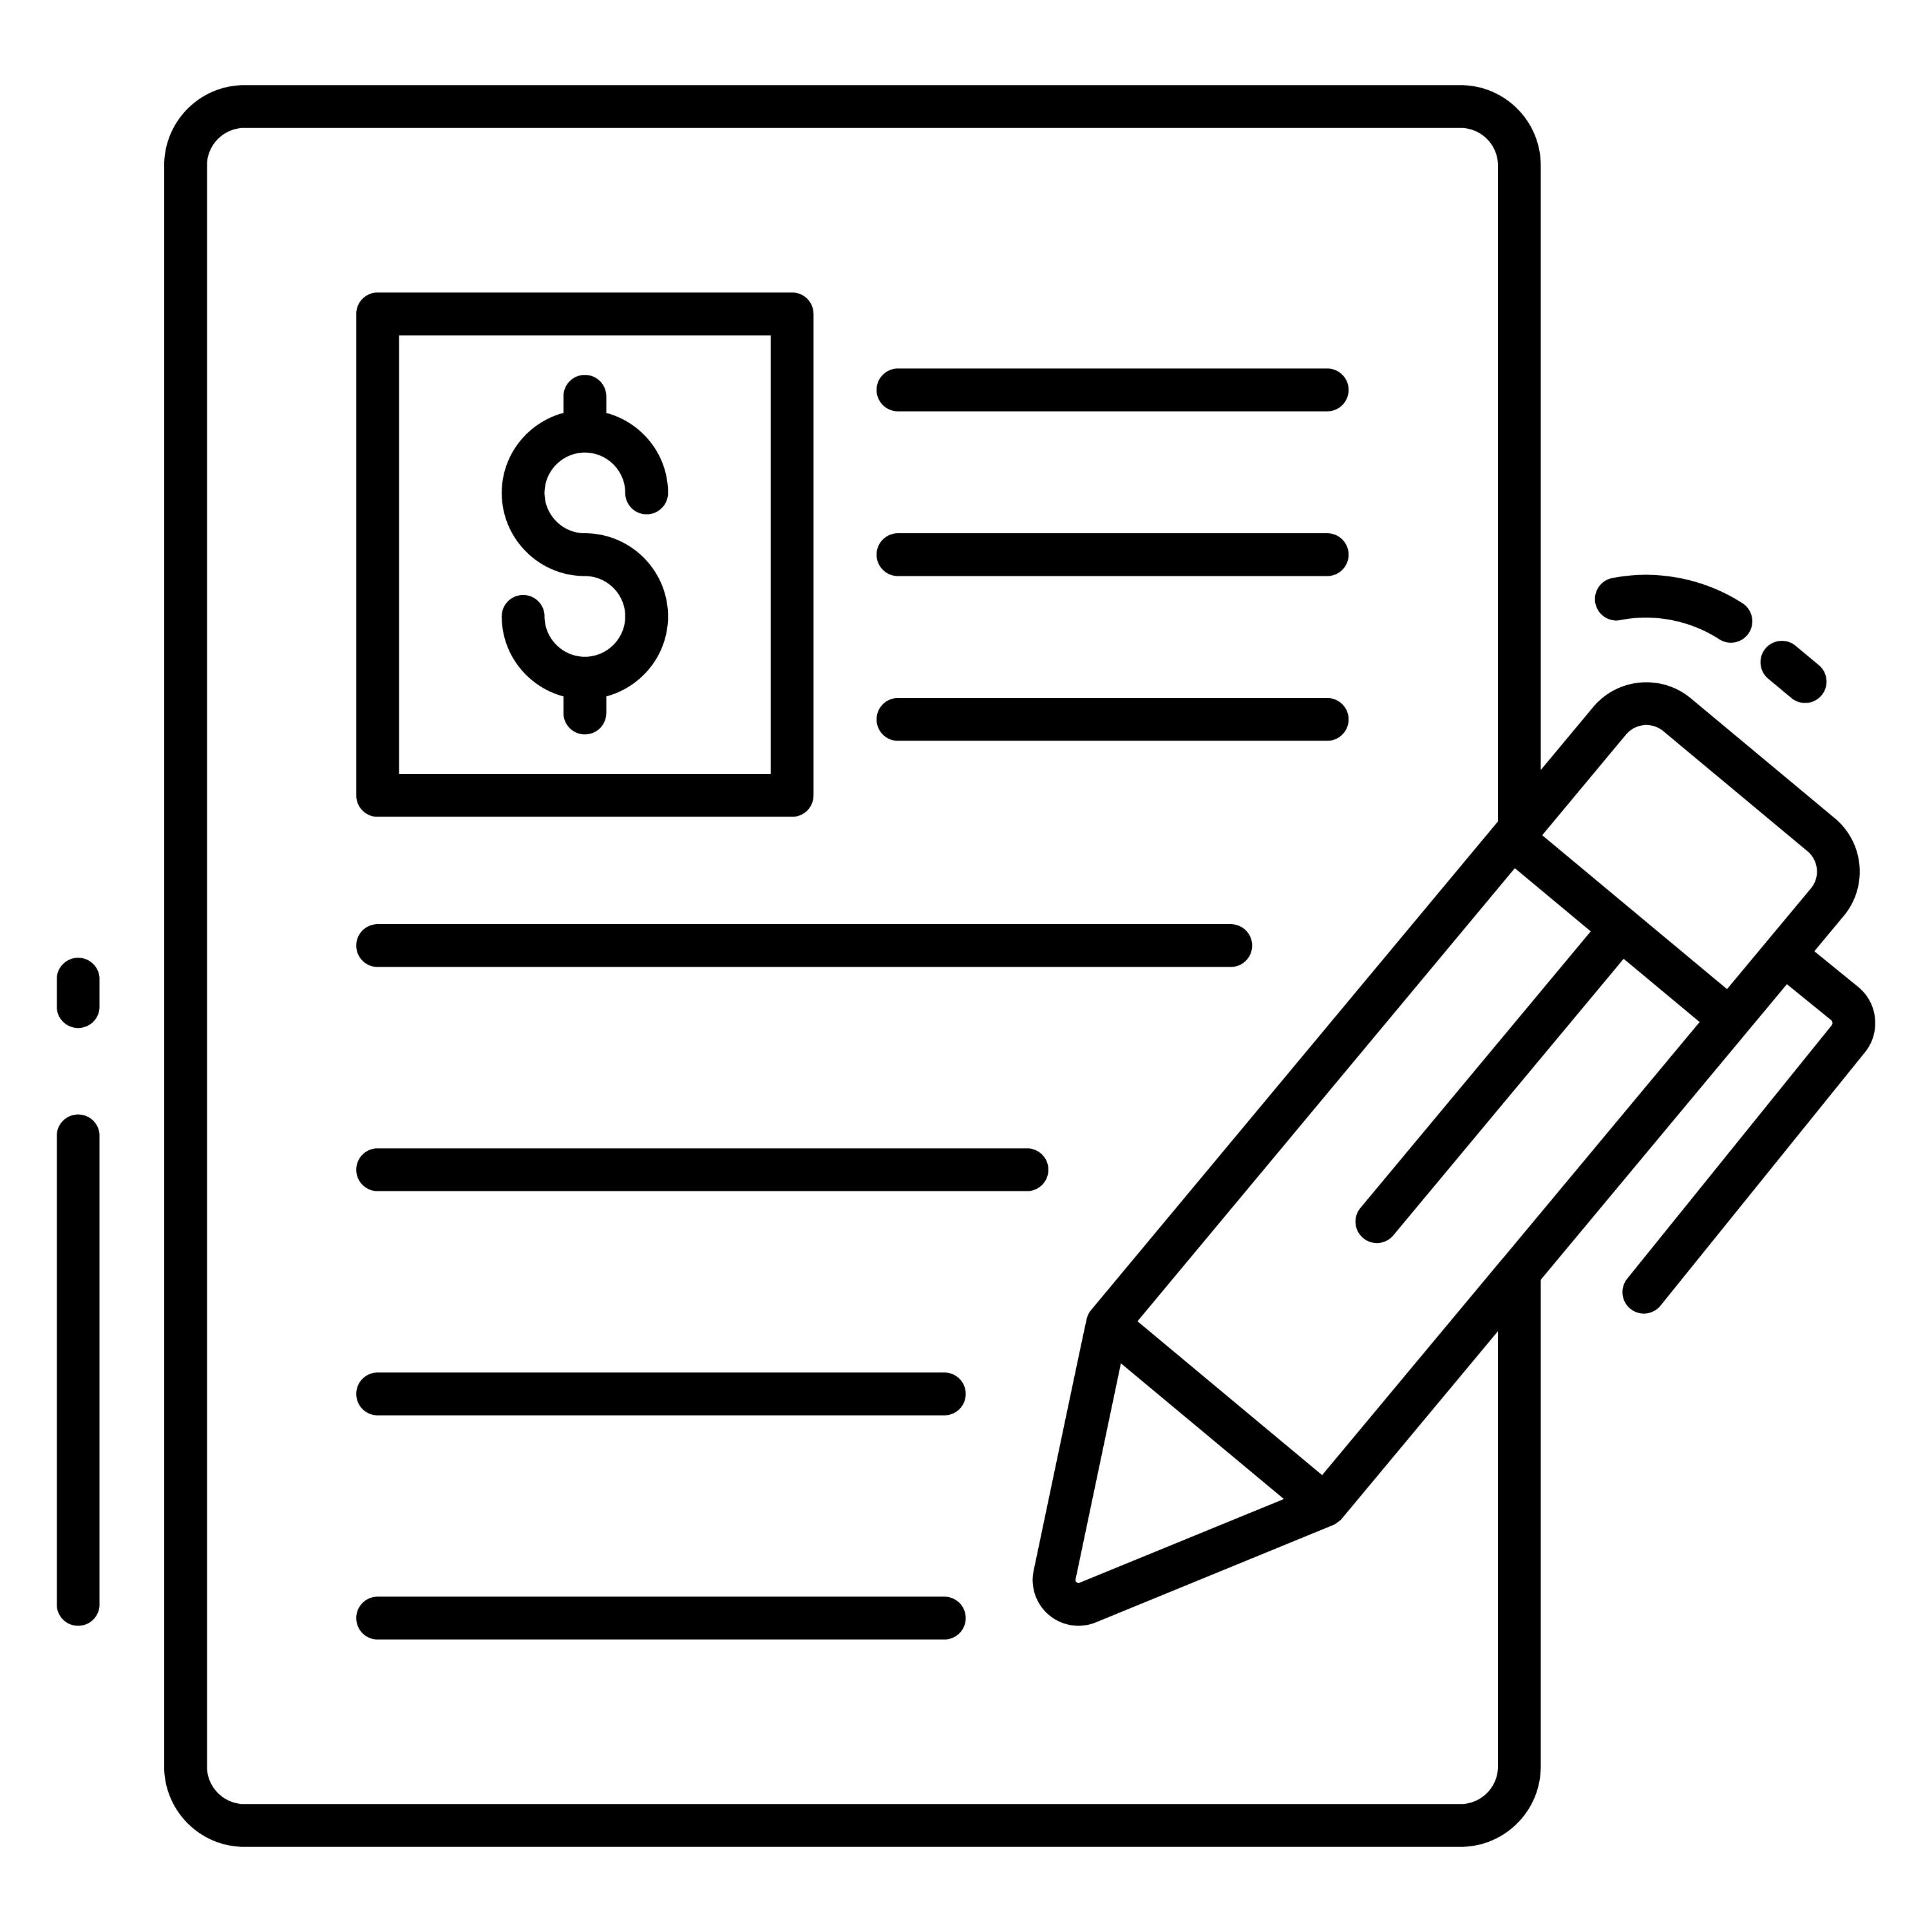 A graphic with a money symbol on a page and a pencil